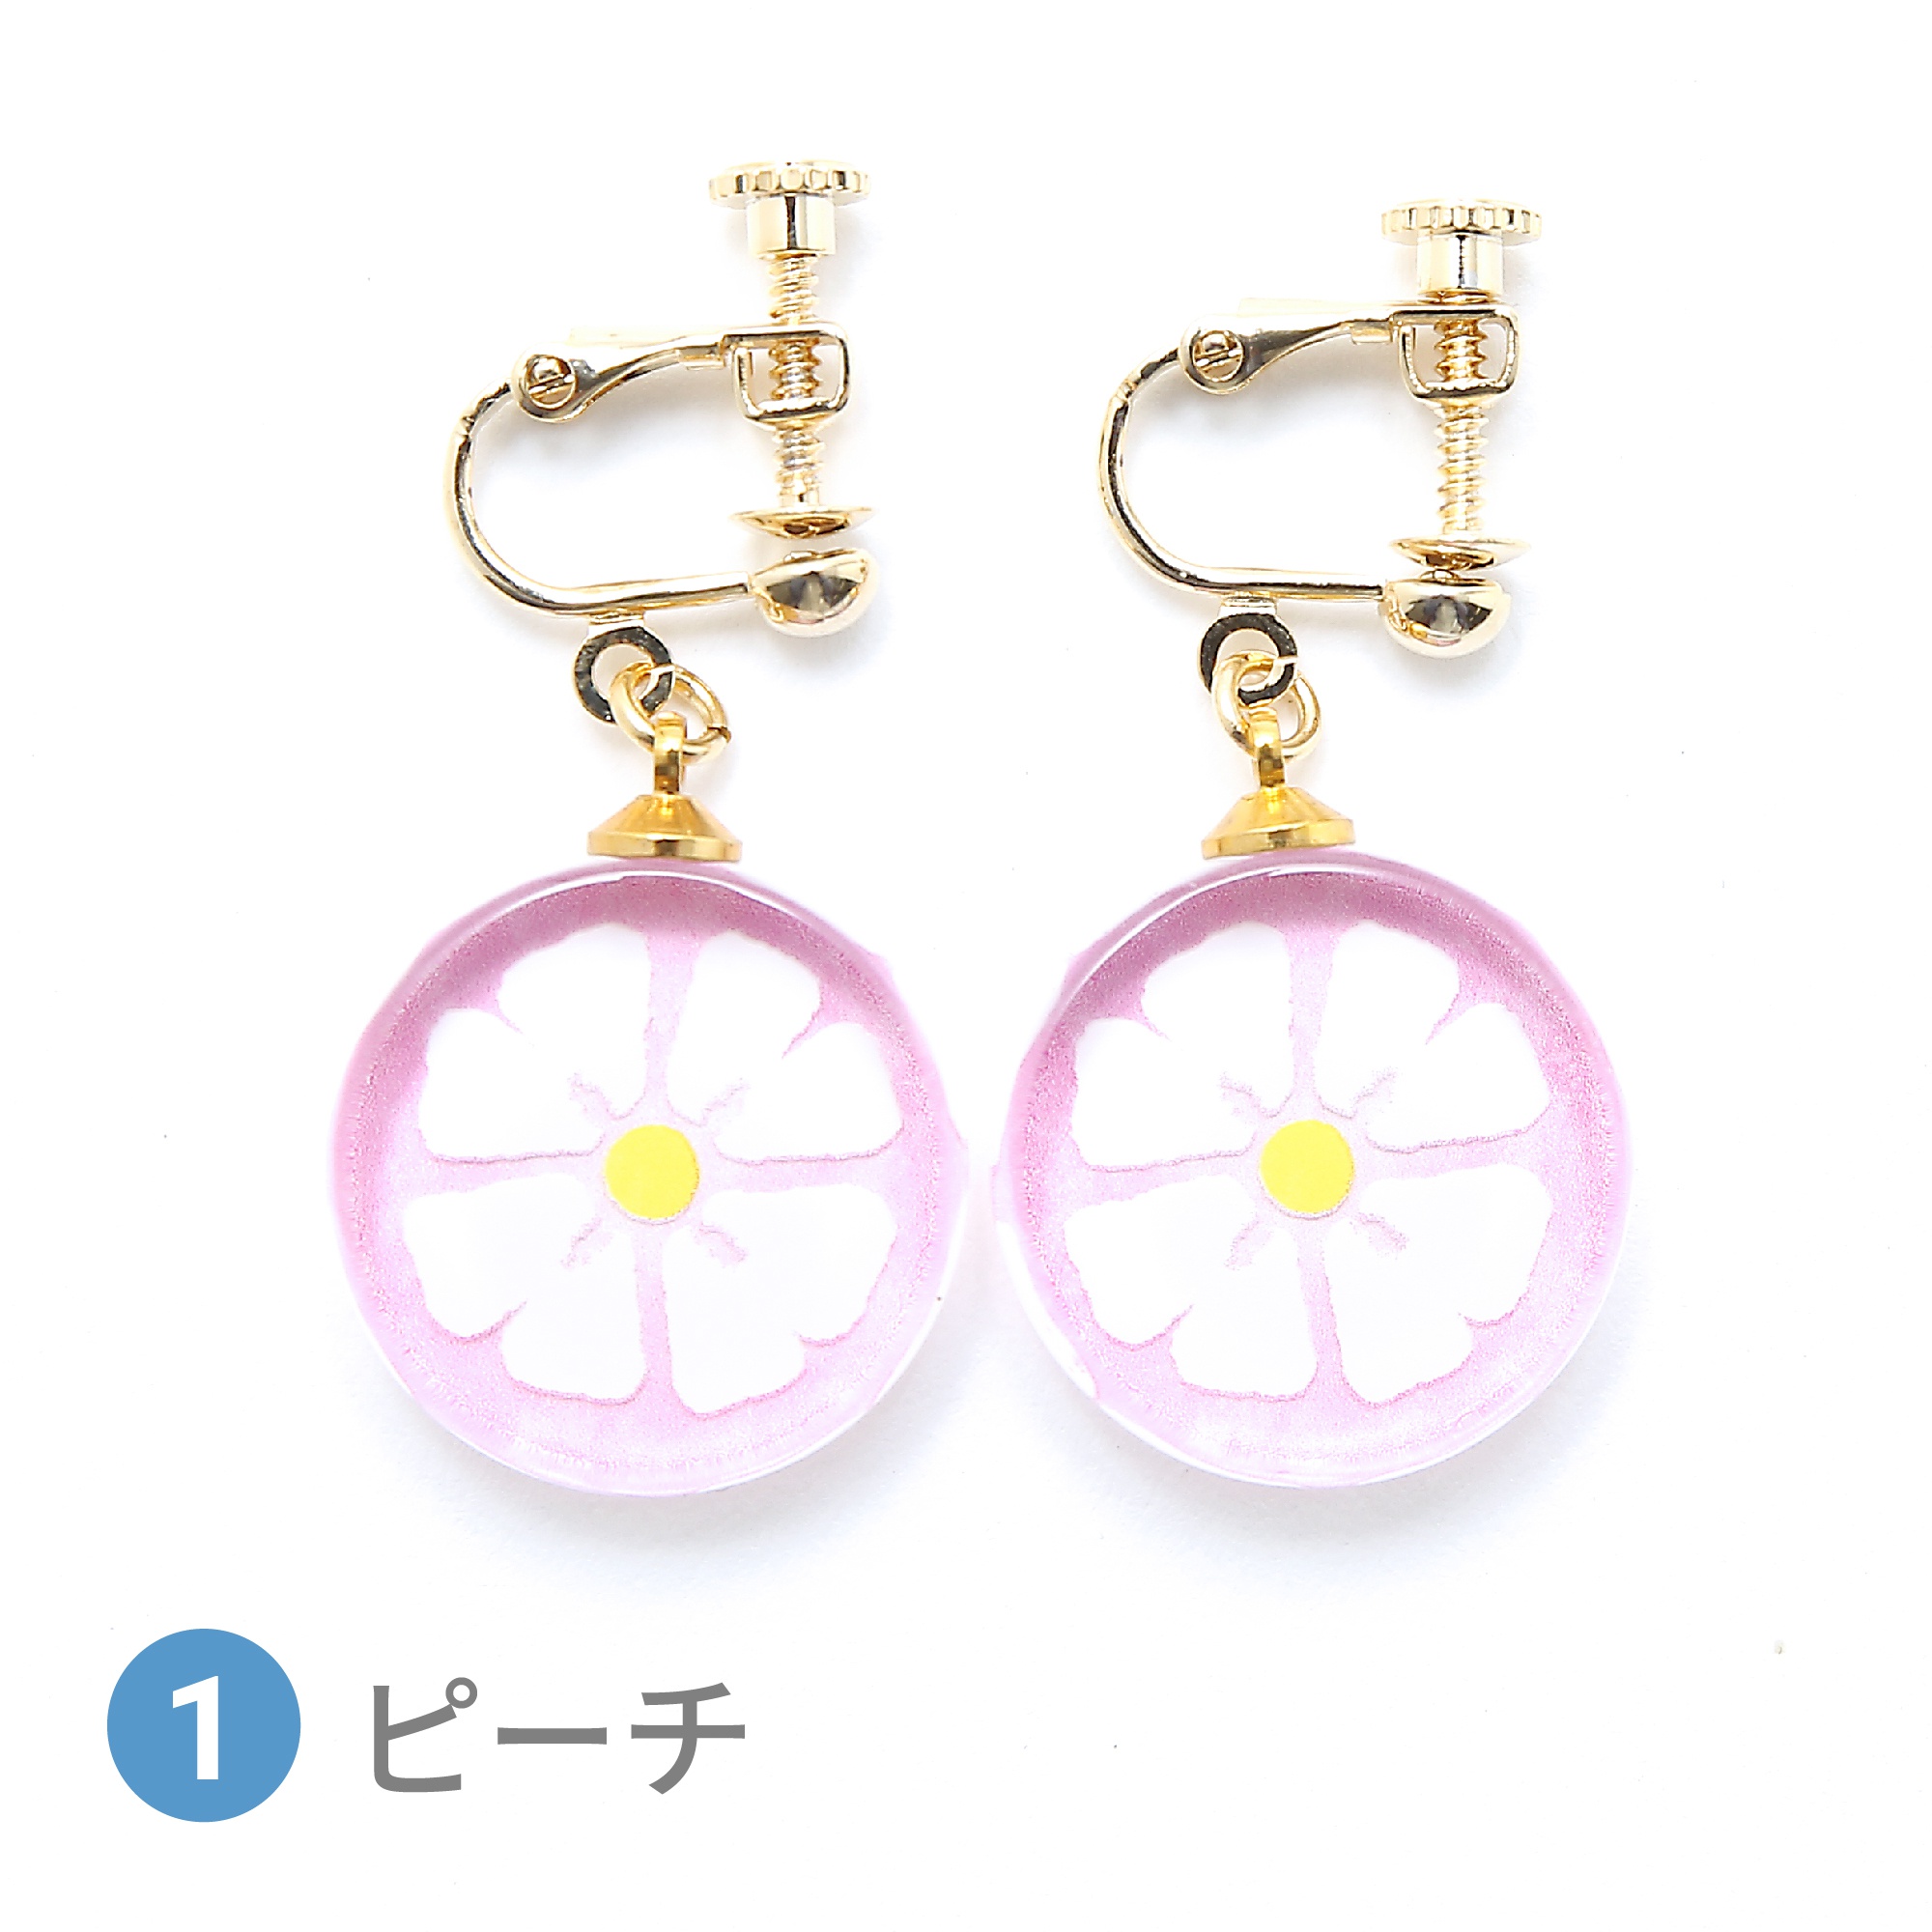 Glass accessories Earring candy peach round shape